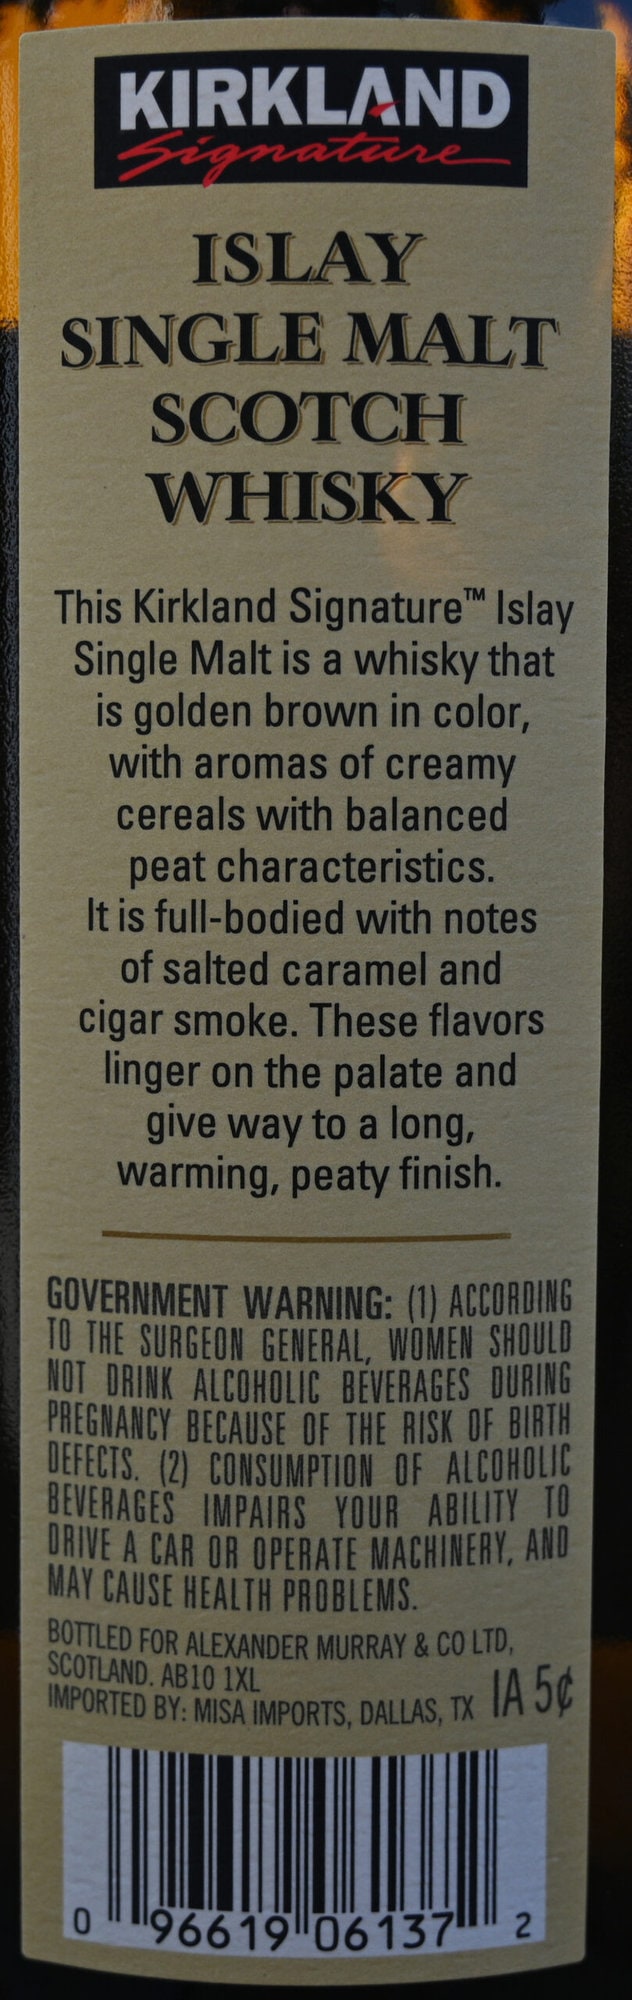 Image of the product description from the back of the bottle of the KIrkland Signature Islay Single Malt Scotch Whisky bottle.